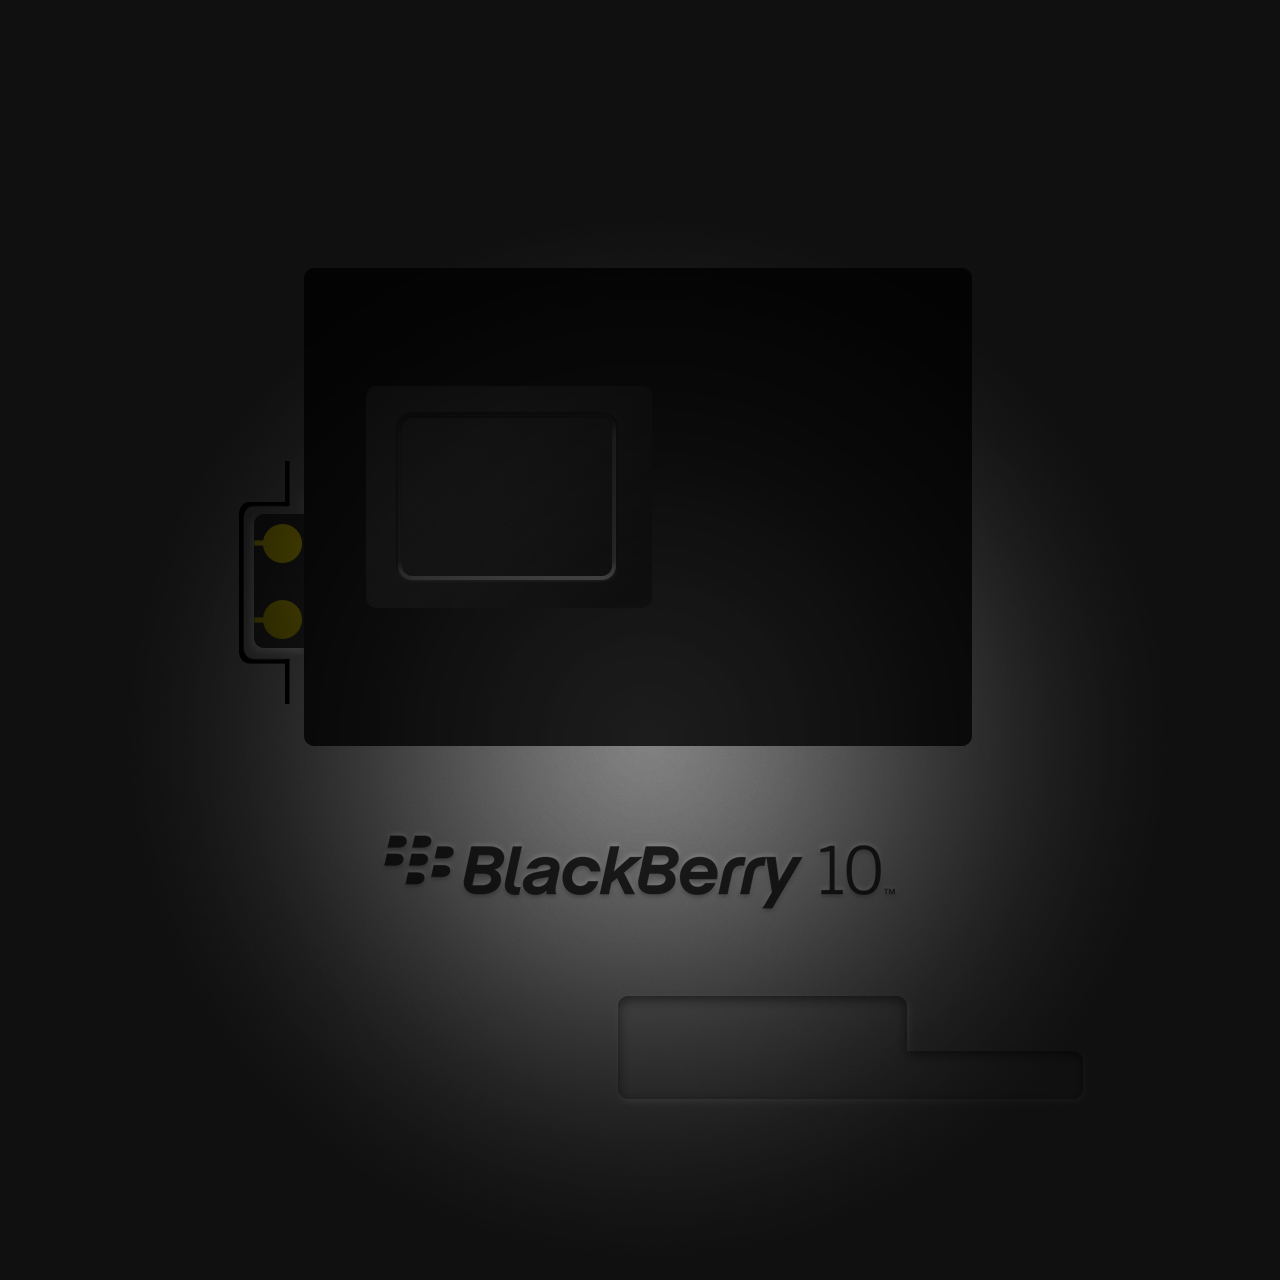 BlackBerry Q10 Limited Edition Wallpapers - BlackBerry 10 Wallpapers